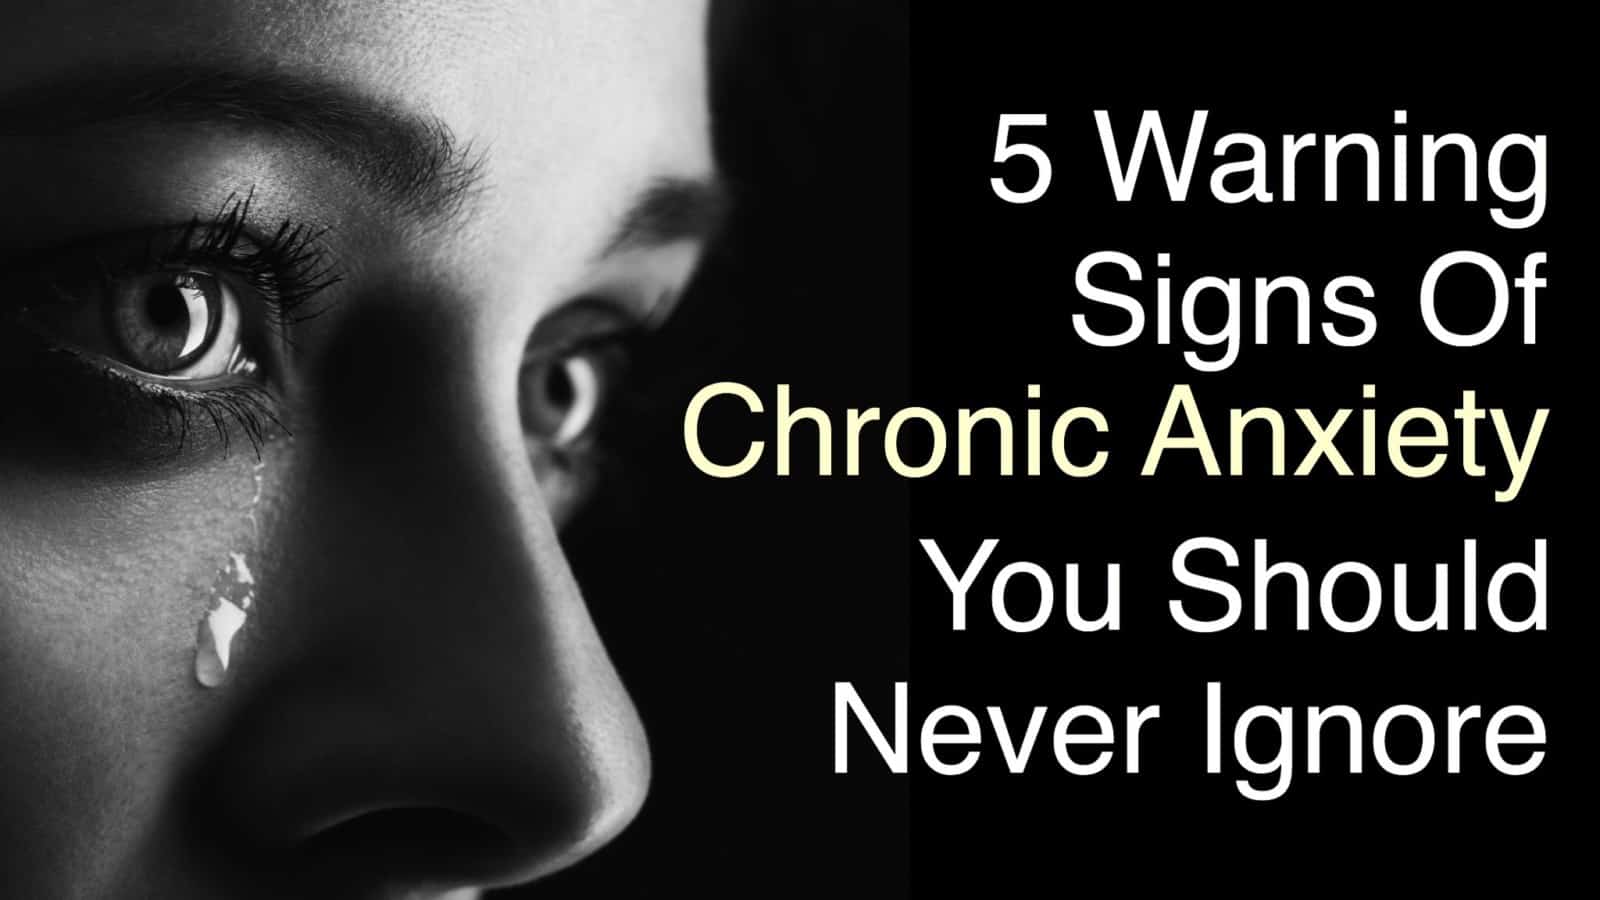 5 Warning Signs Of Chronic Anxiety You Should Never Ignore